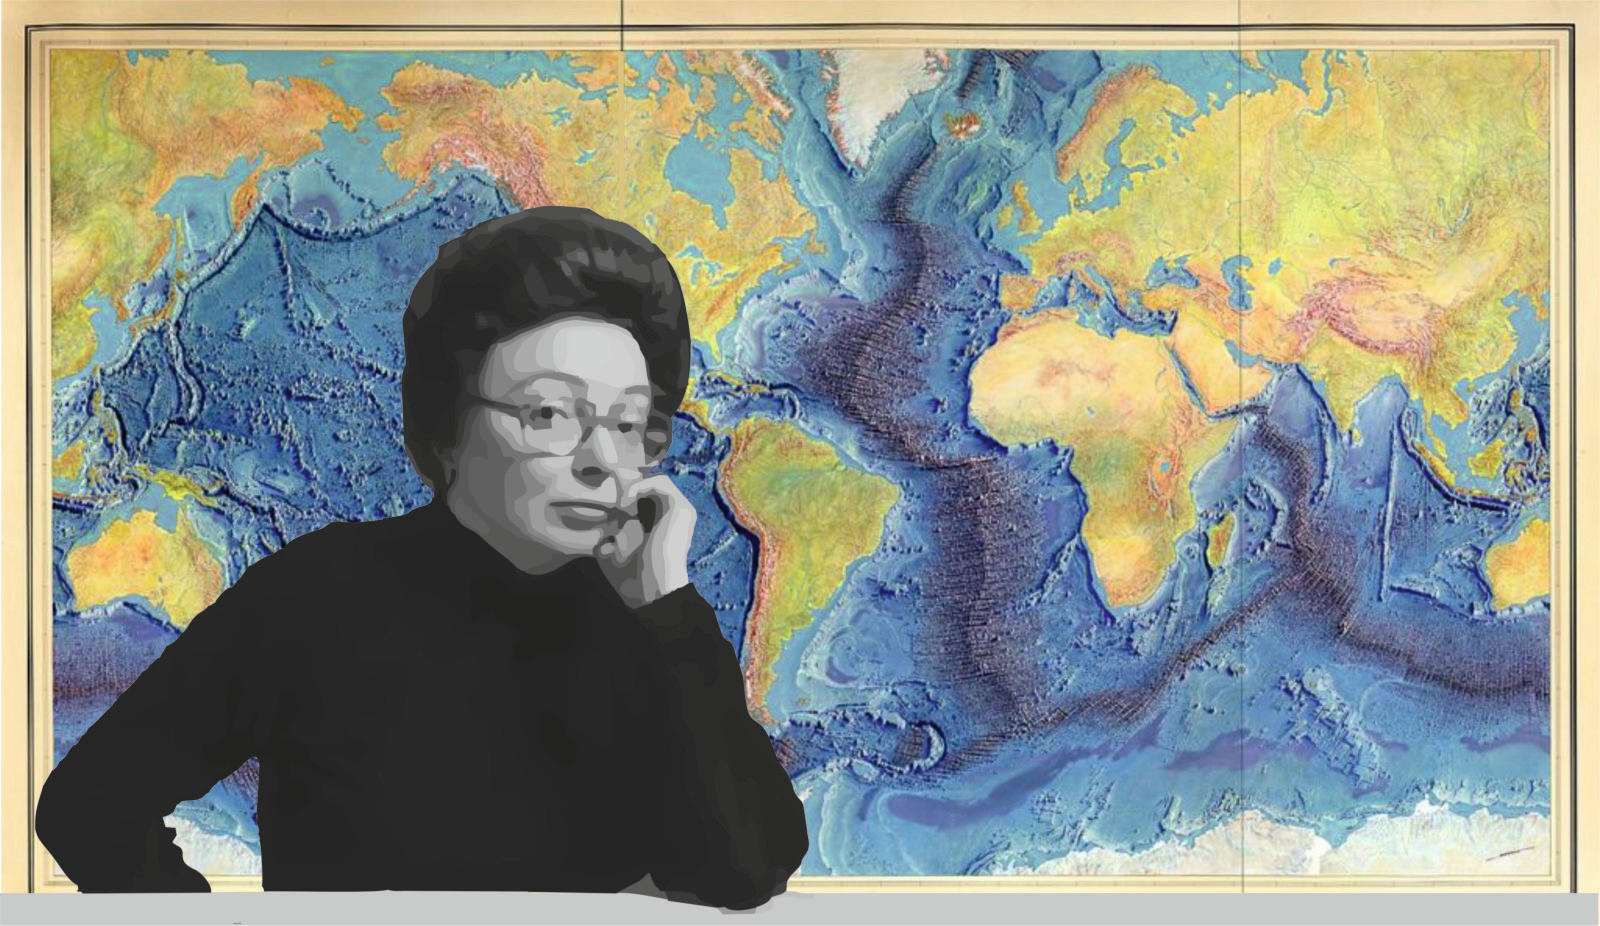 Google Doodle honours geologist Marie Tharp's life and contributions_40.1